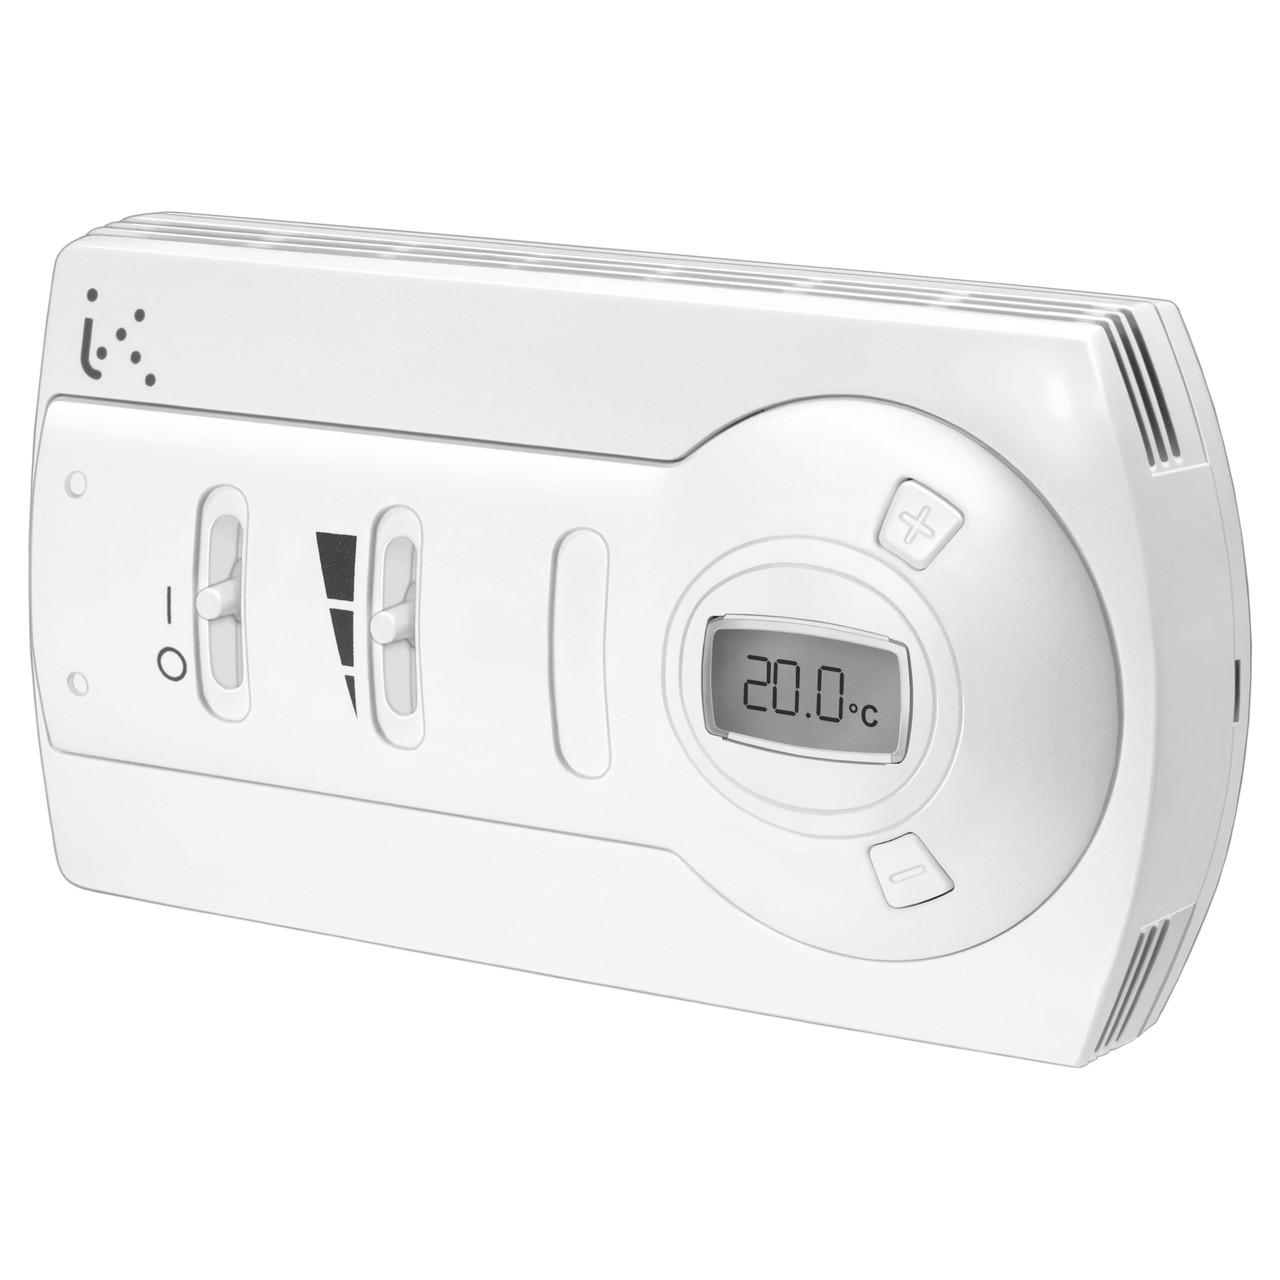 DB-TA-3C3-13A Room Thermostats 2 Stages With Economy Function P12148